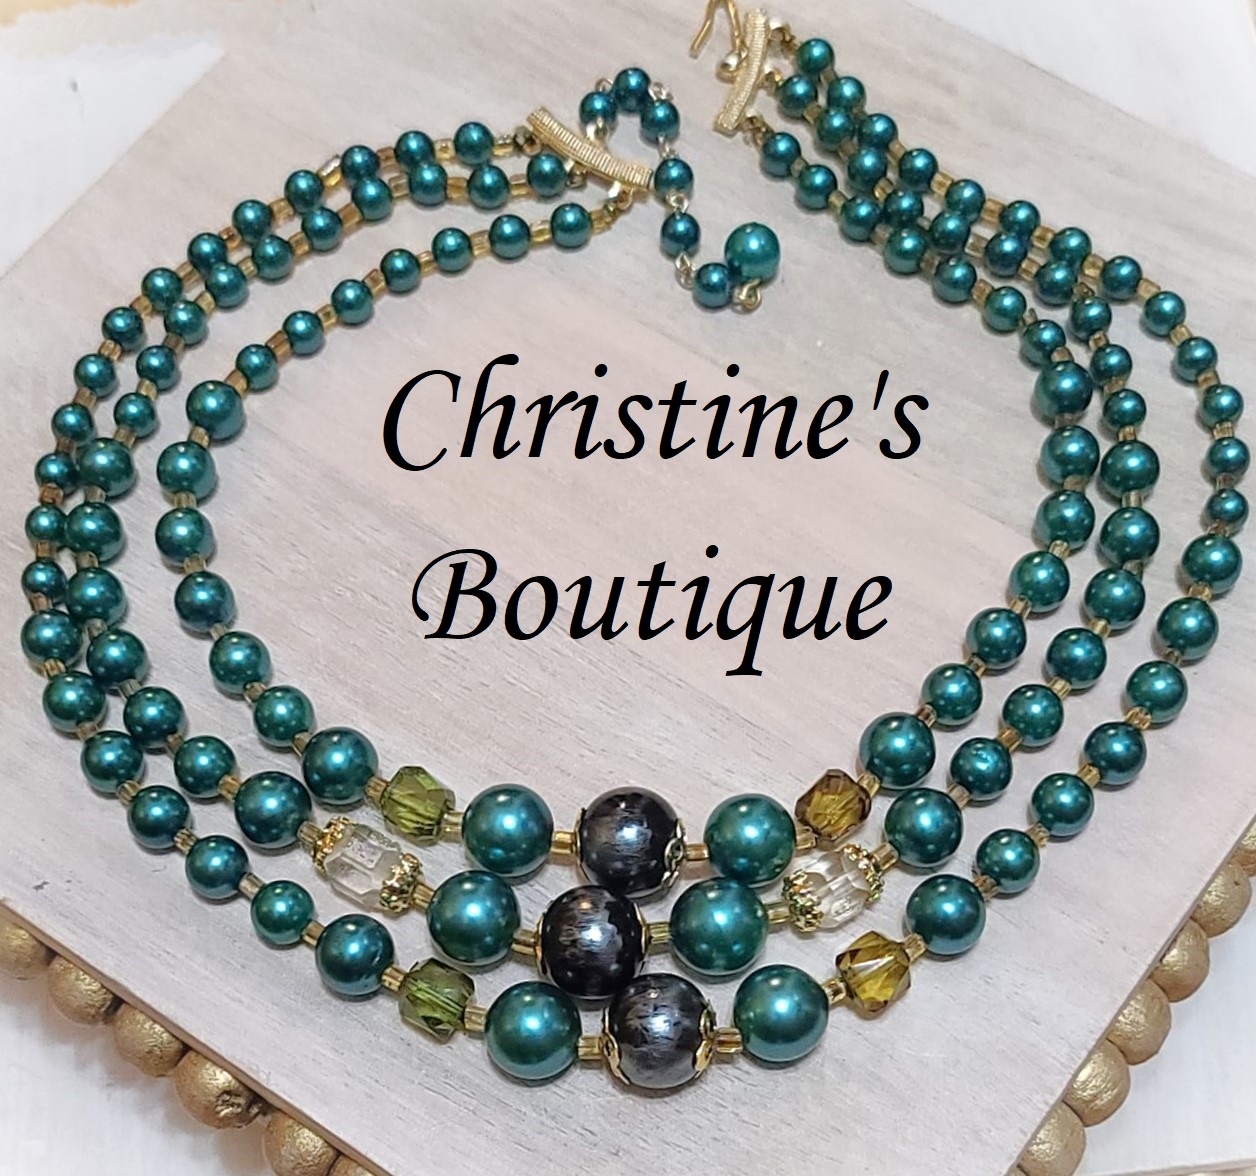 Evergreen green and crystals 3 strand choker vintage necklace